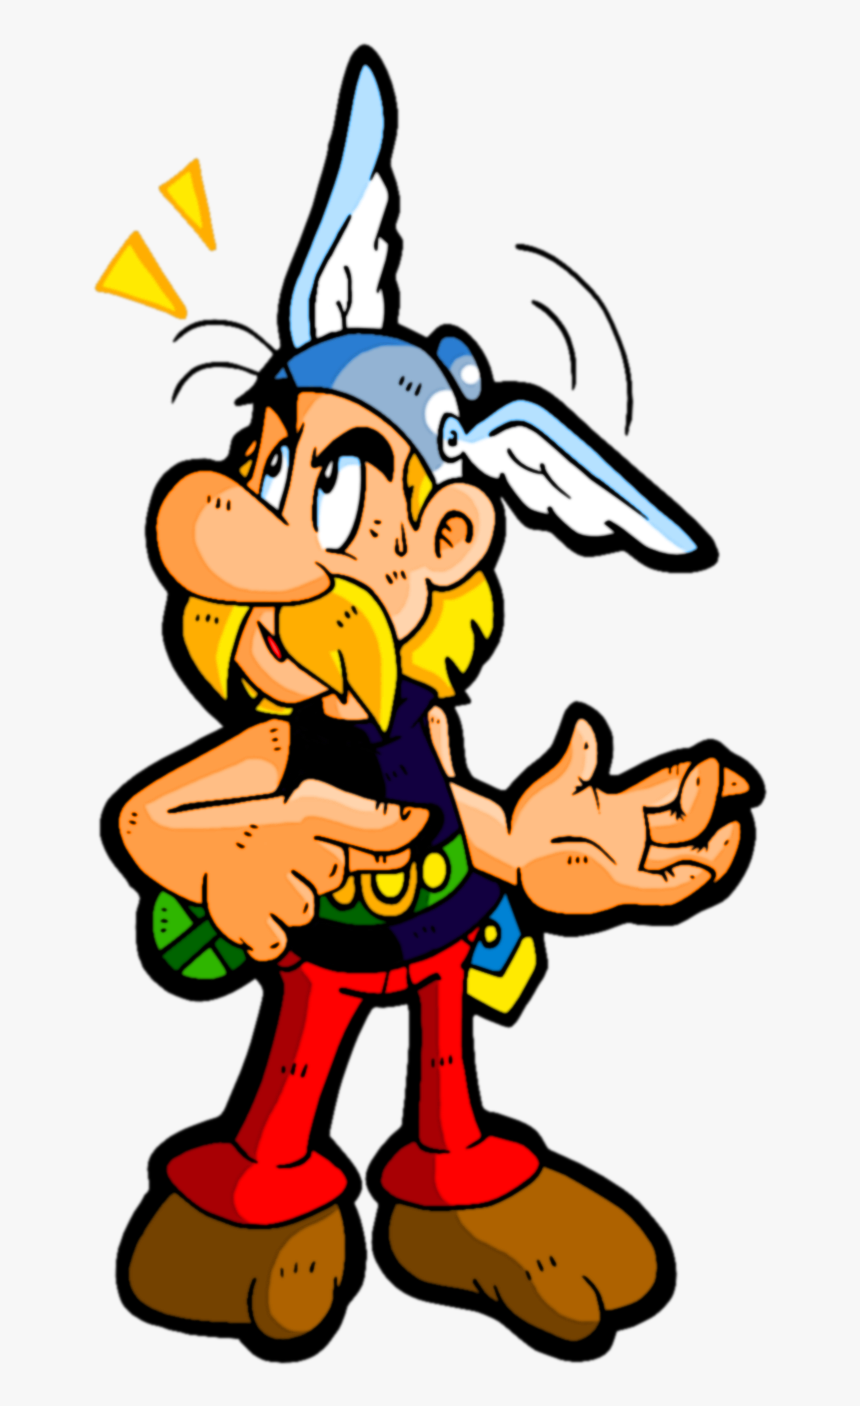 Asterix Moustache Gaulois - Asterix, HD Png Download, Free Download